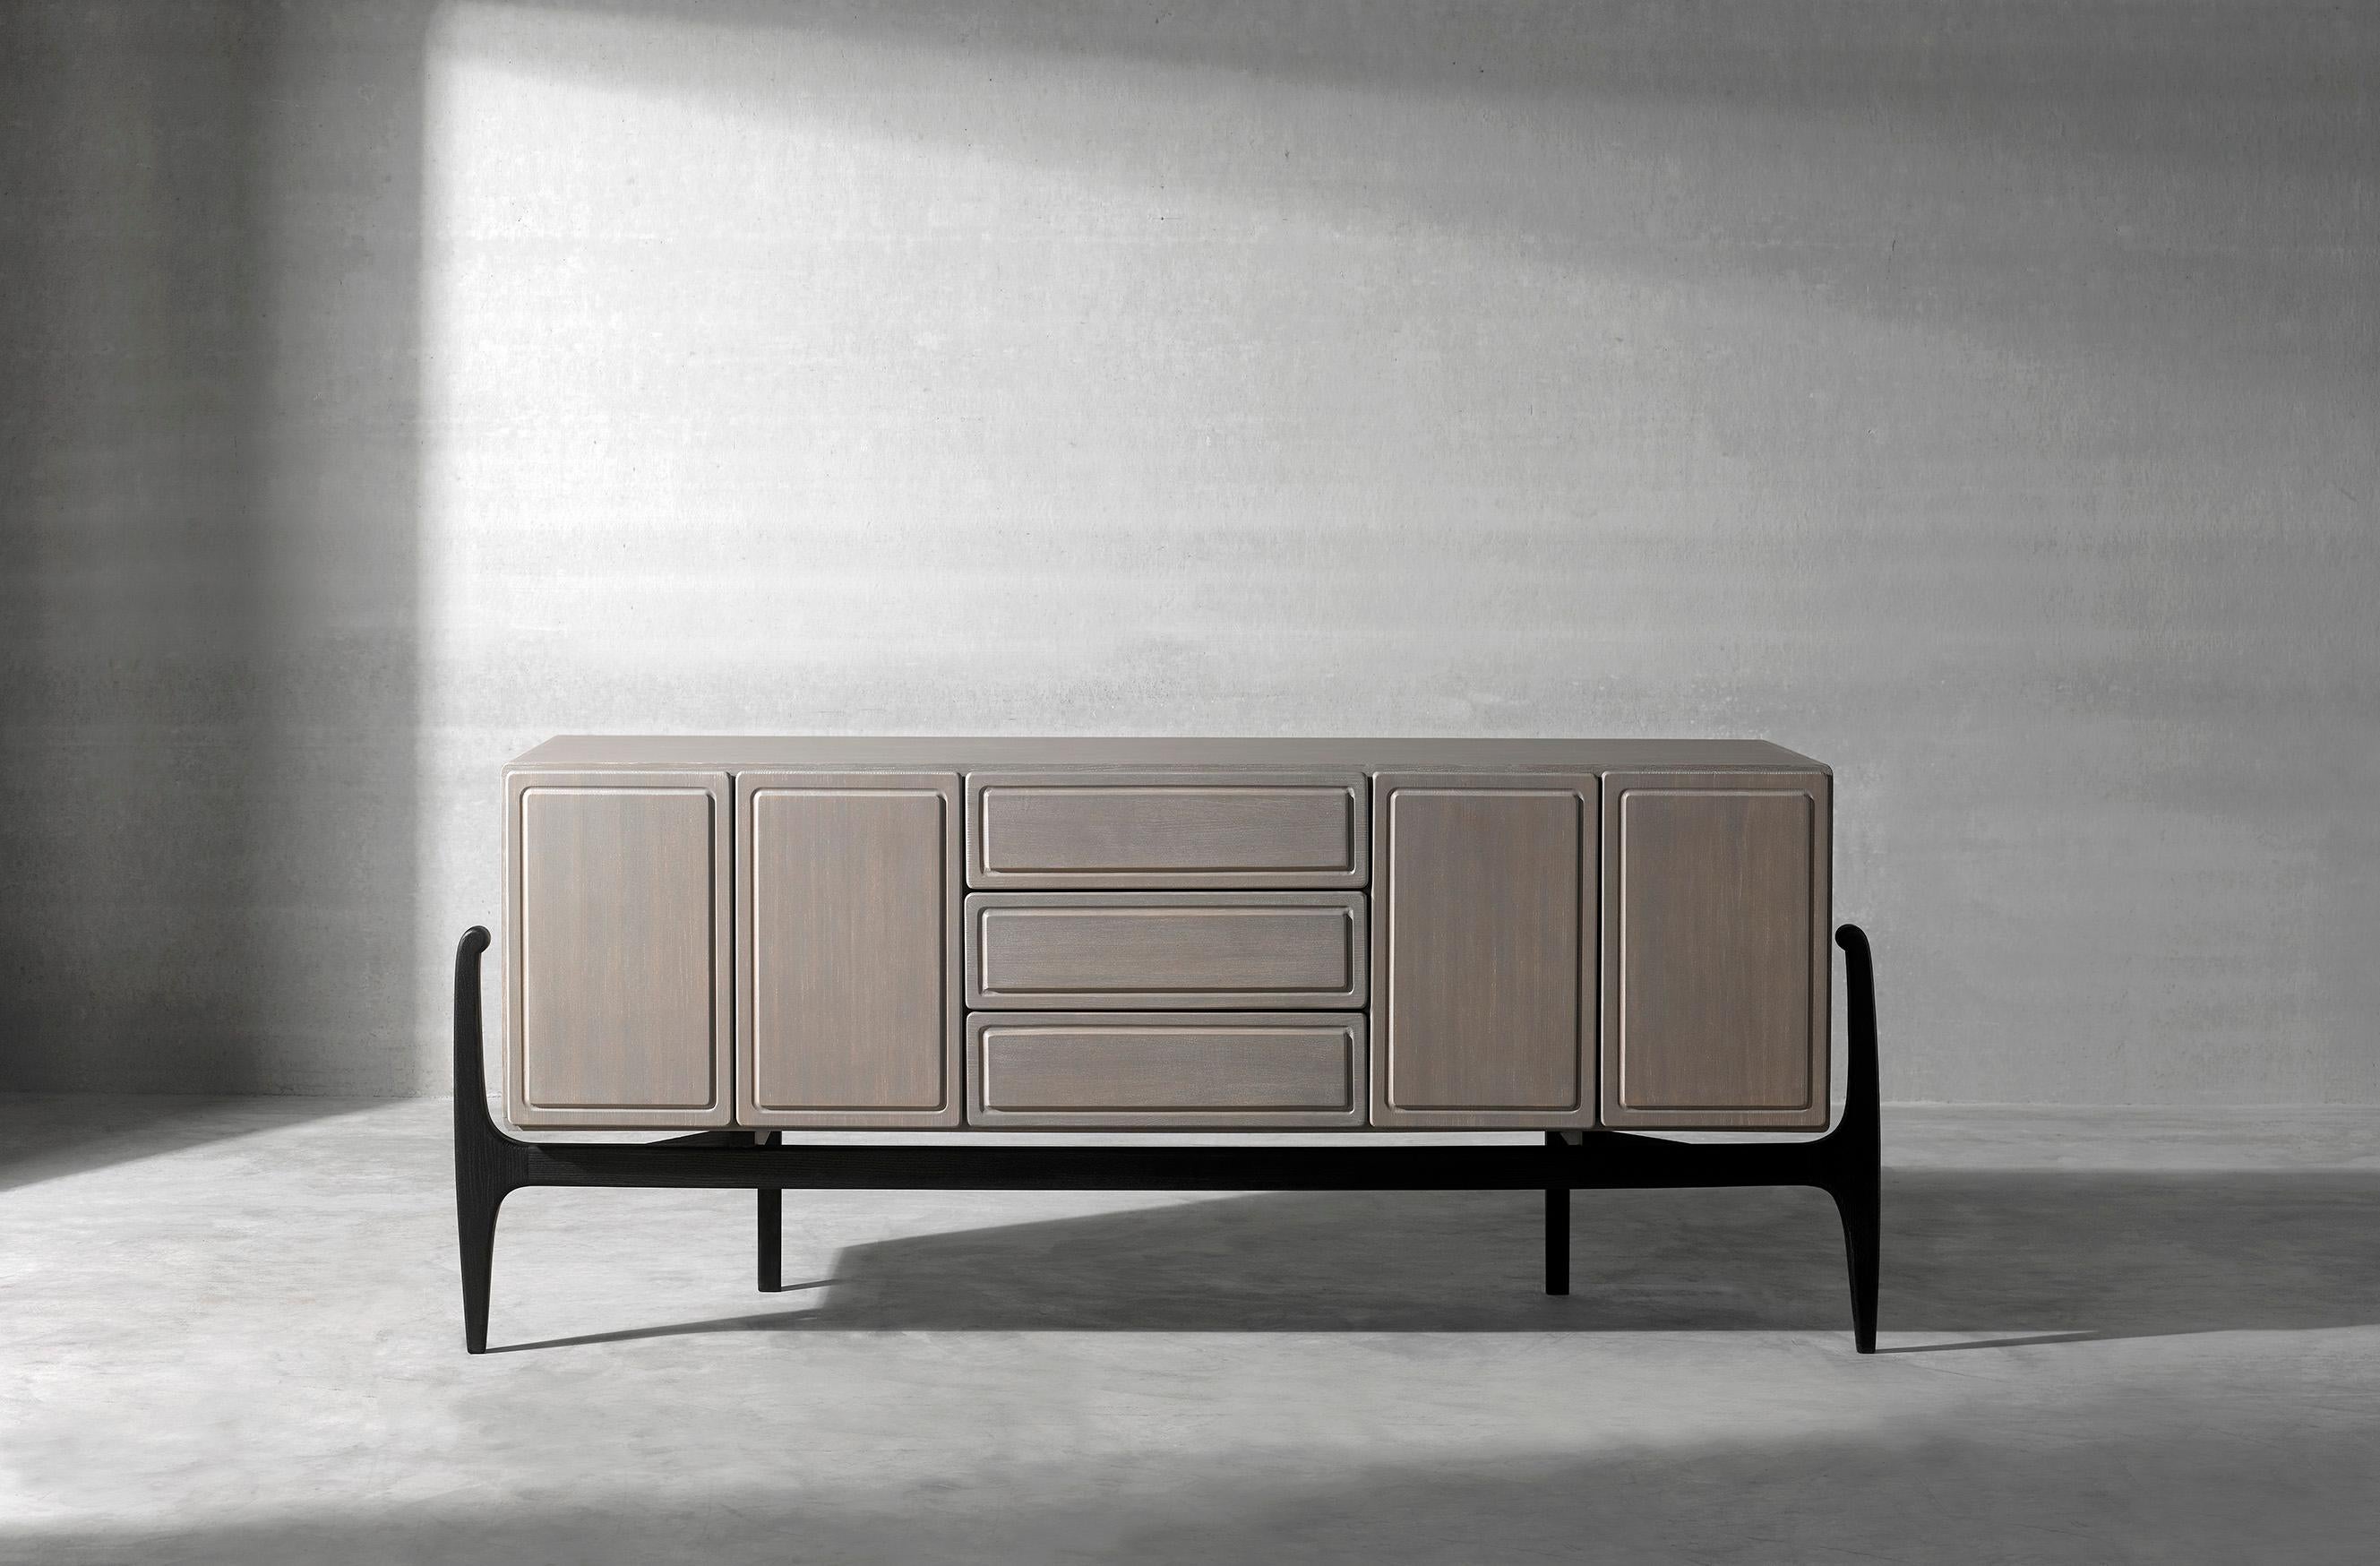 The one sideboard is a contemporary piece designed by the Asian designer Ben Wu. His refined design is a perfect fusion of the elegance of traditional Chinese and modern European aesthetics. The lines, inspired by the spirit of Chinese Calligraphy